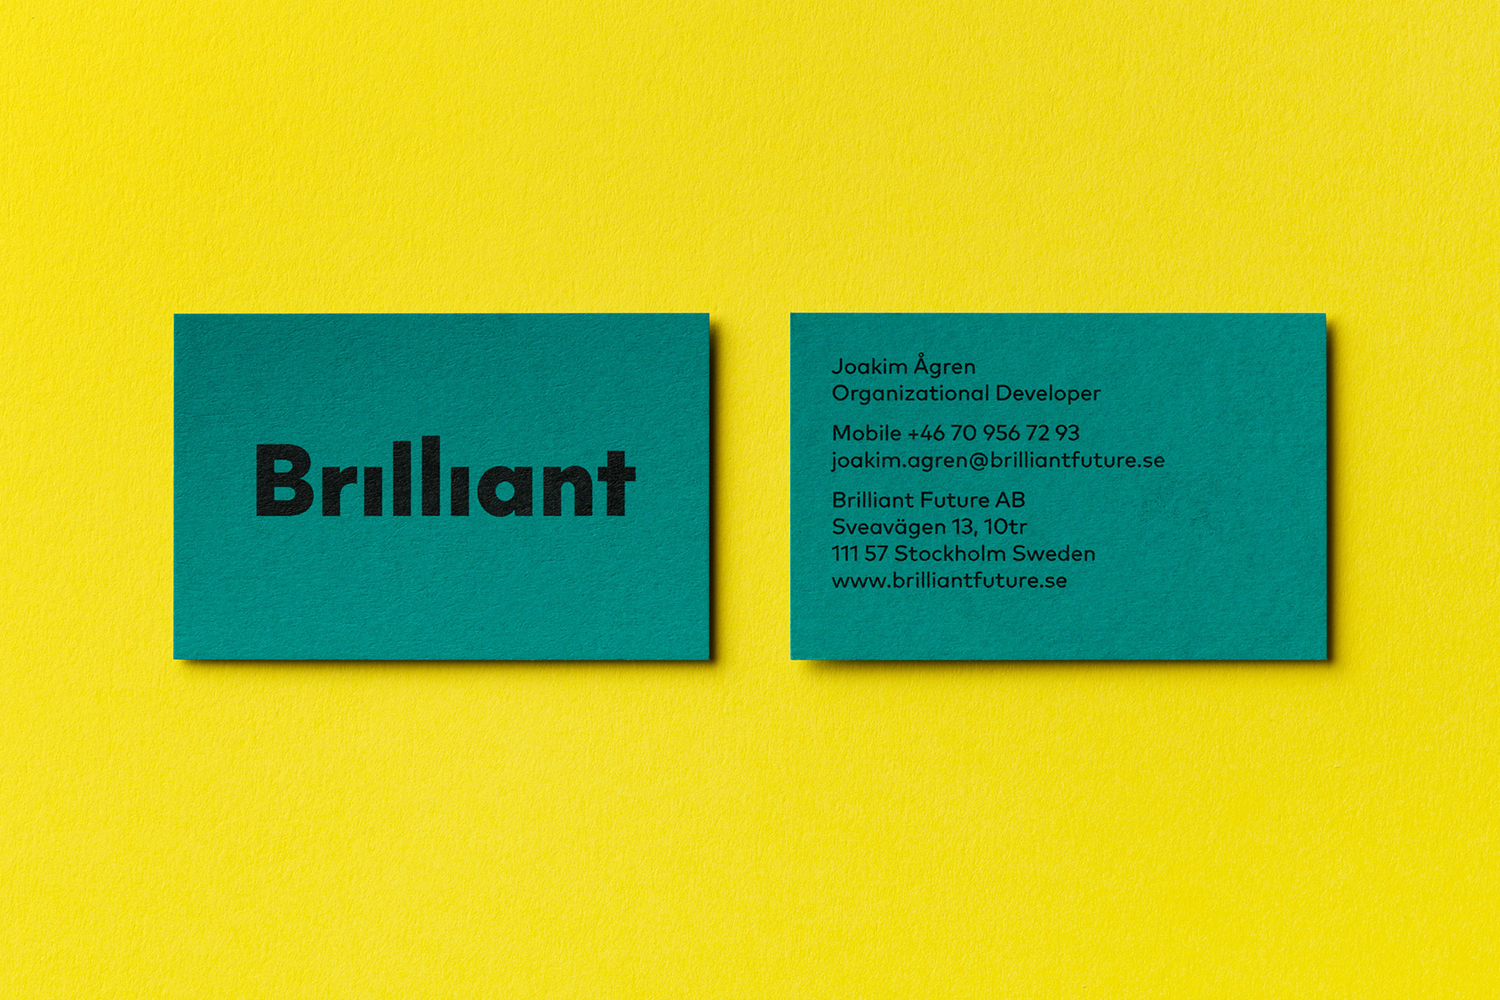 Colourful Business Cards – Brilliant by The Studio